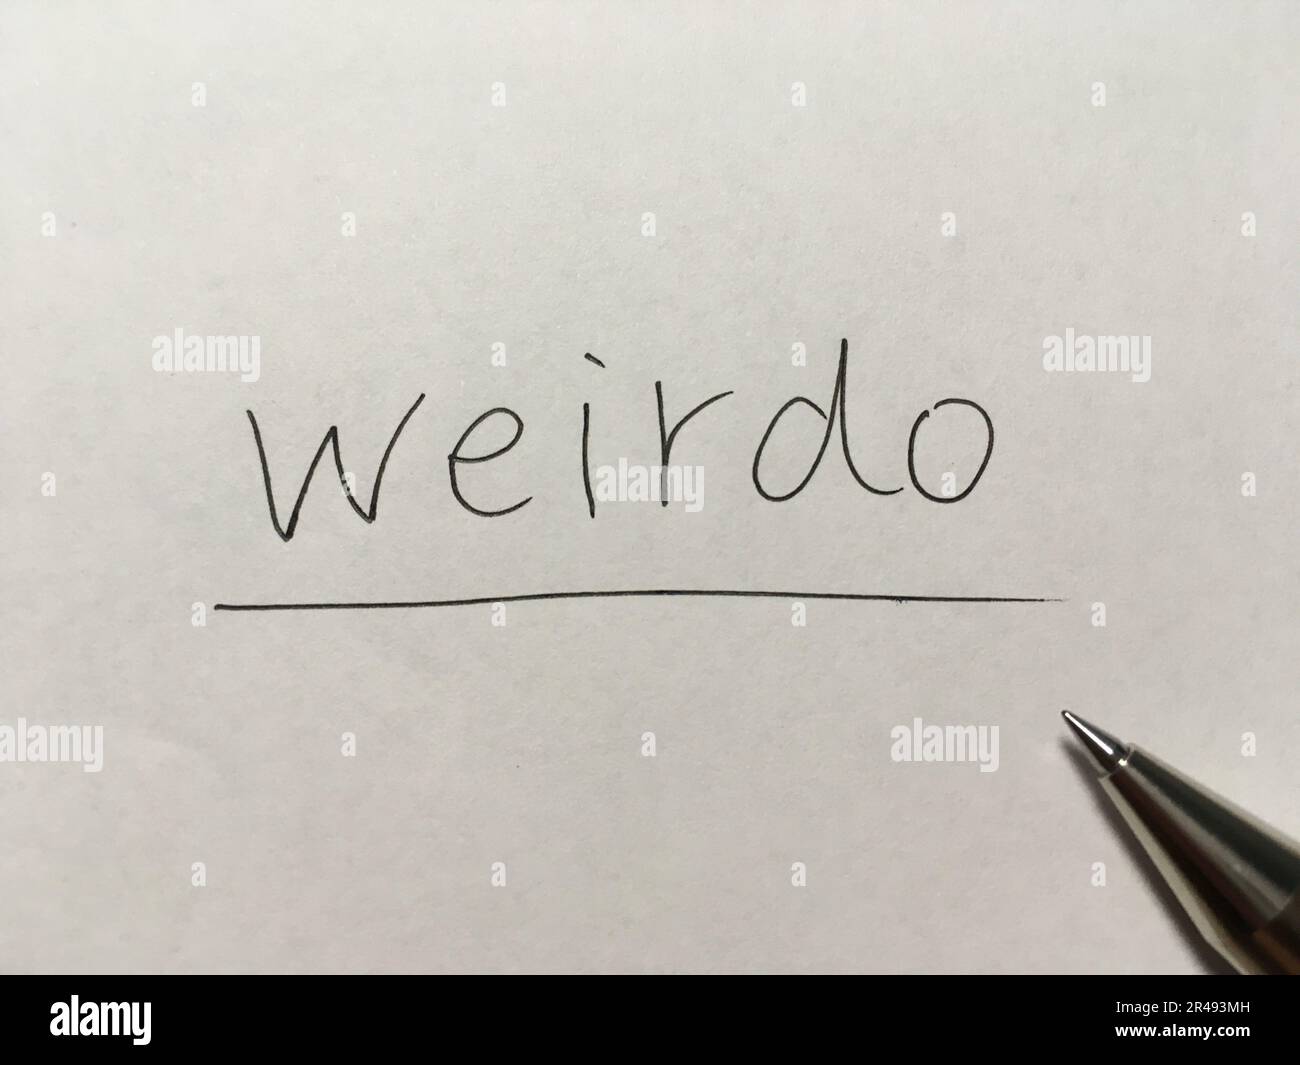 Weirdo concept word on paper background Stock Photo